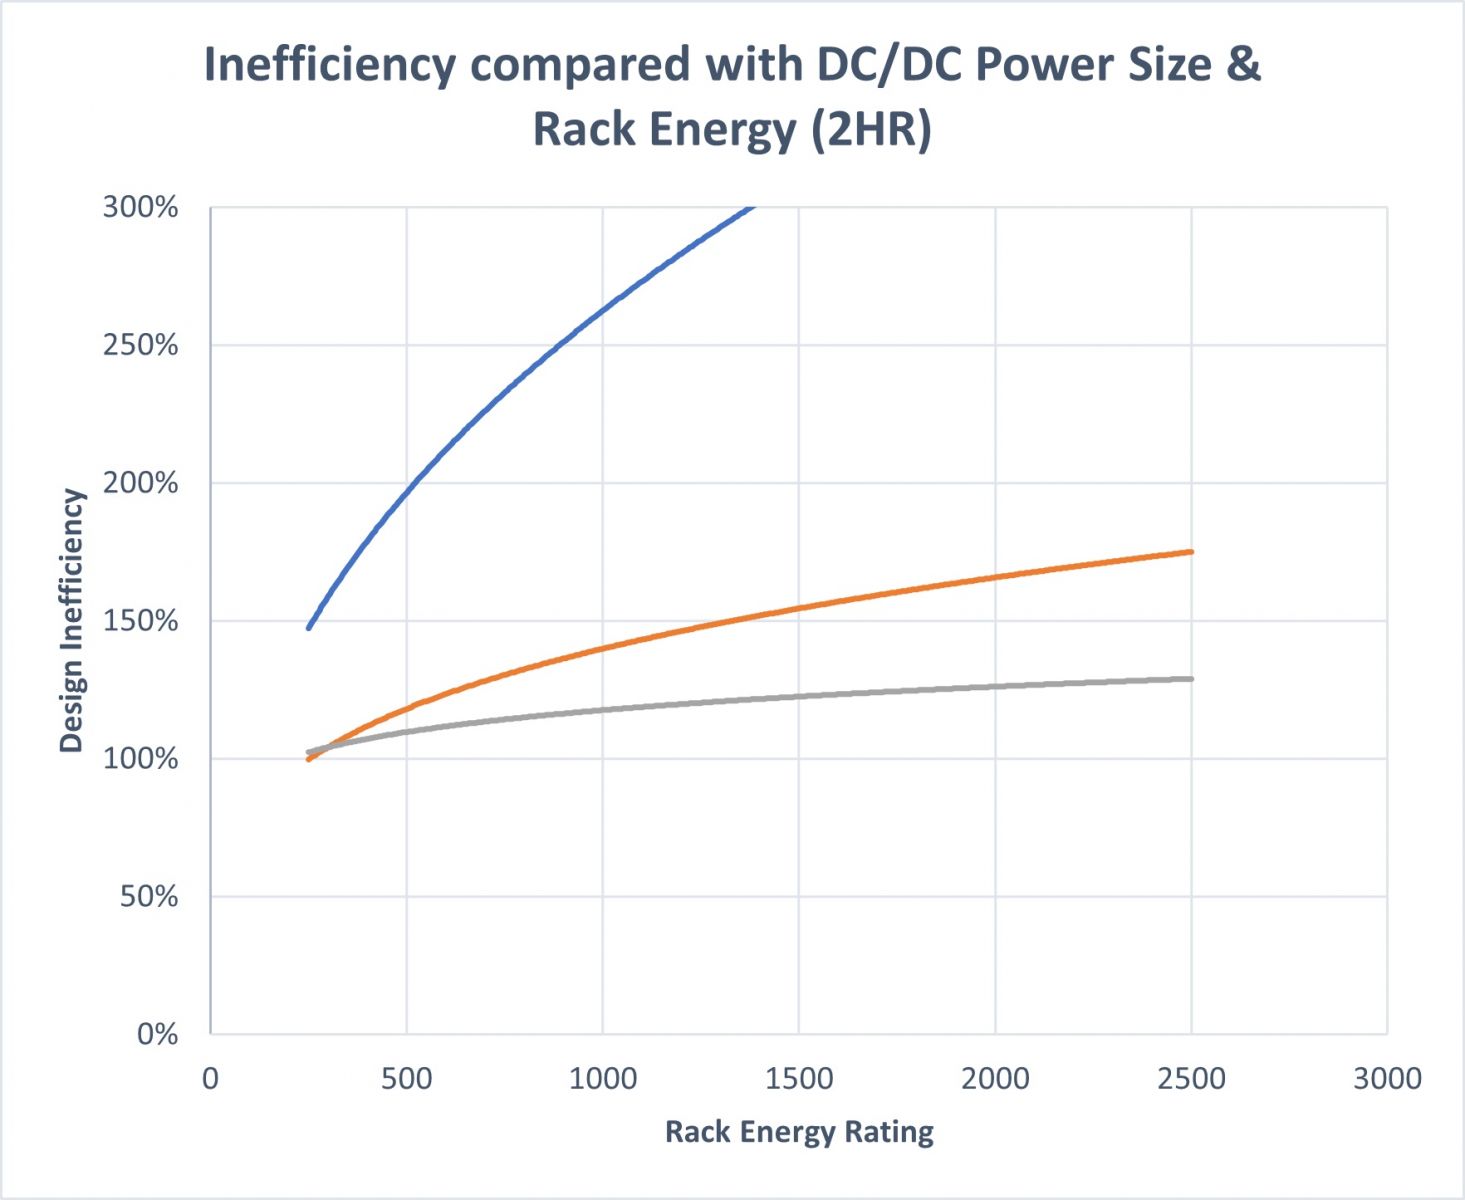 Figure 1: Efficiency gained in a 2-hour system with better sizing of battery and converters